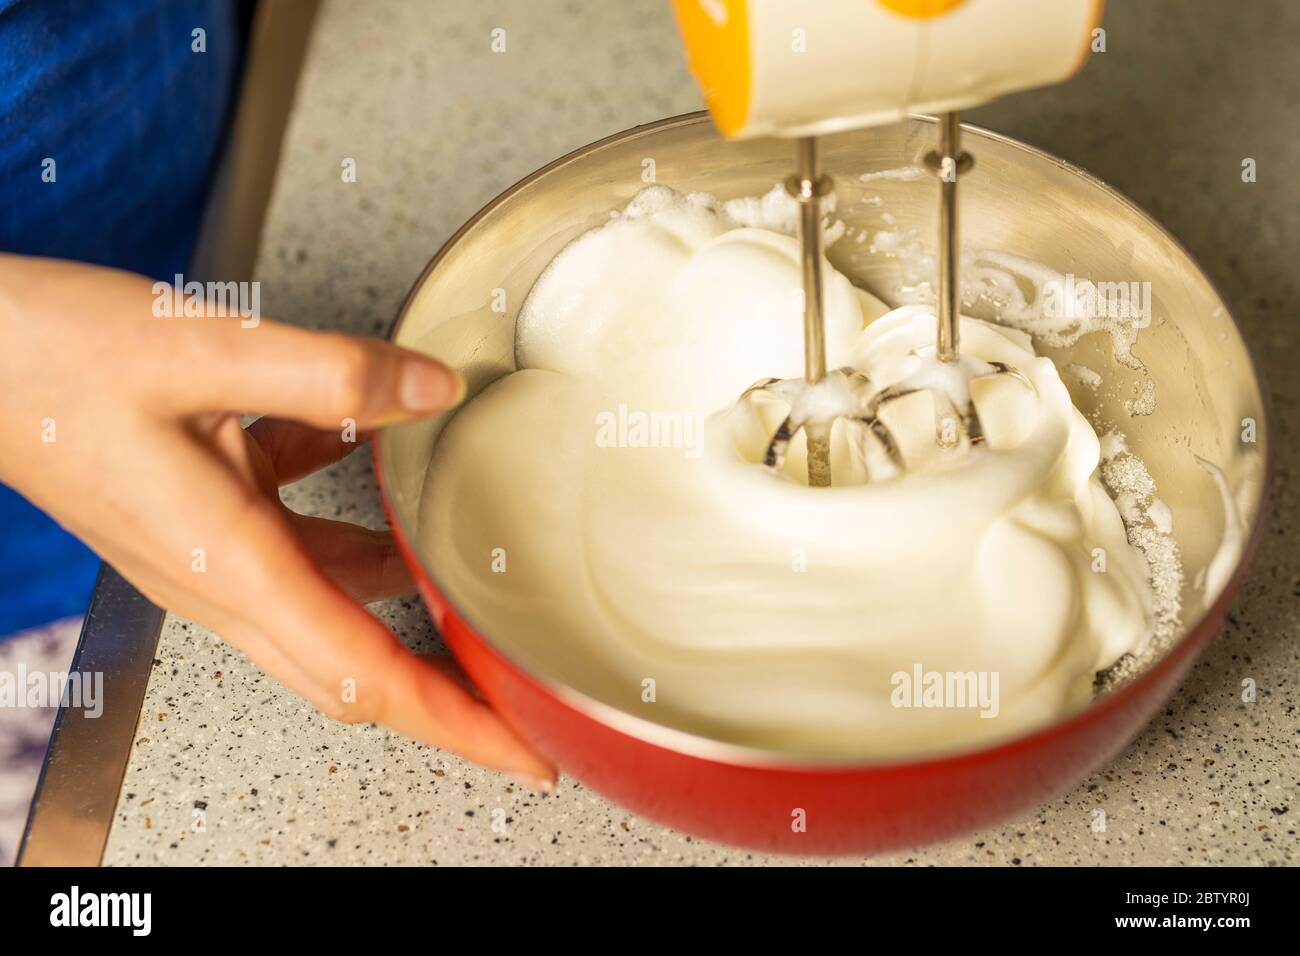 https://c8.alamy.com/comp/2BTYR0J/beating-a-white-cream-with-a-mixer-in-a-metal-bowl-whipped-cream-cream-for-the-cake-2BTYR0J.jpg